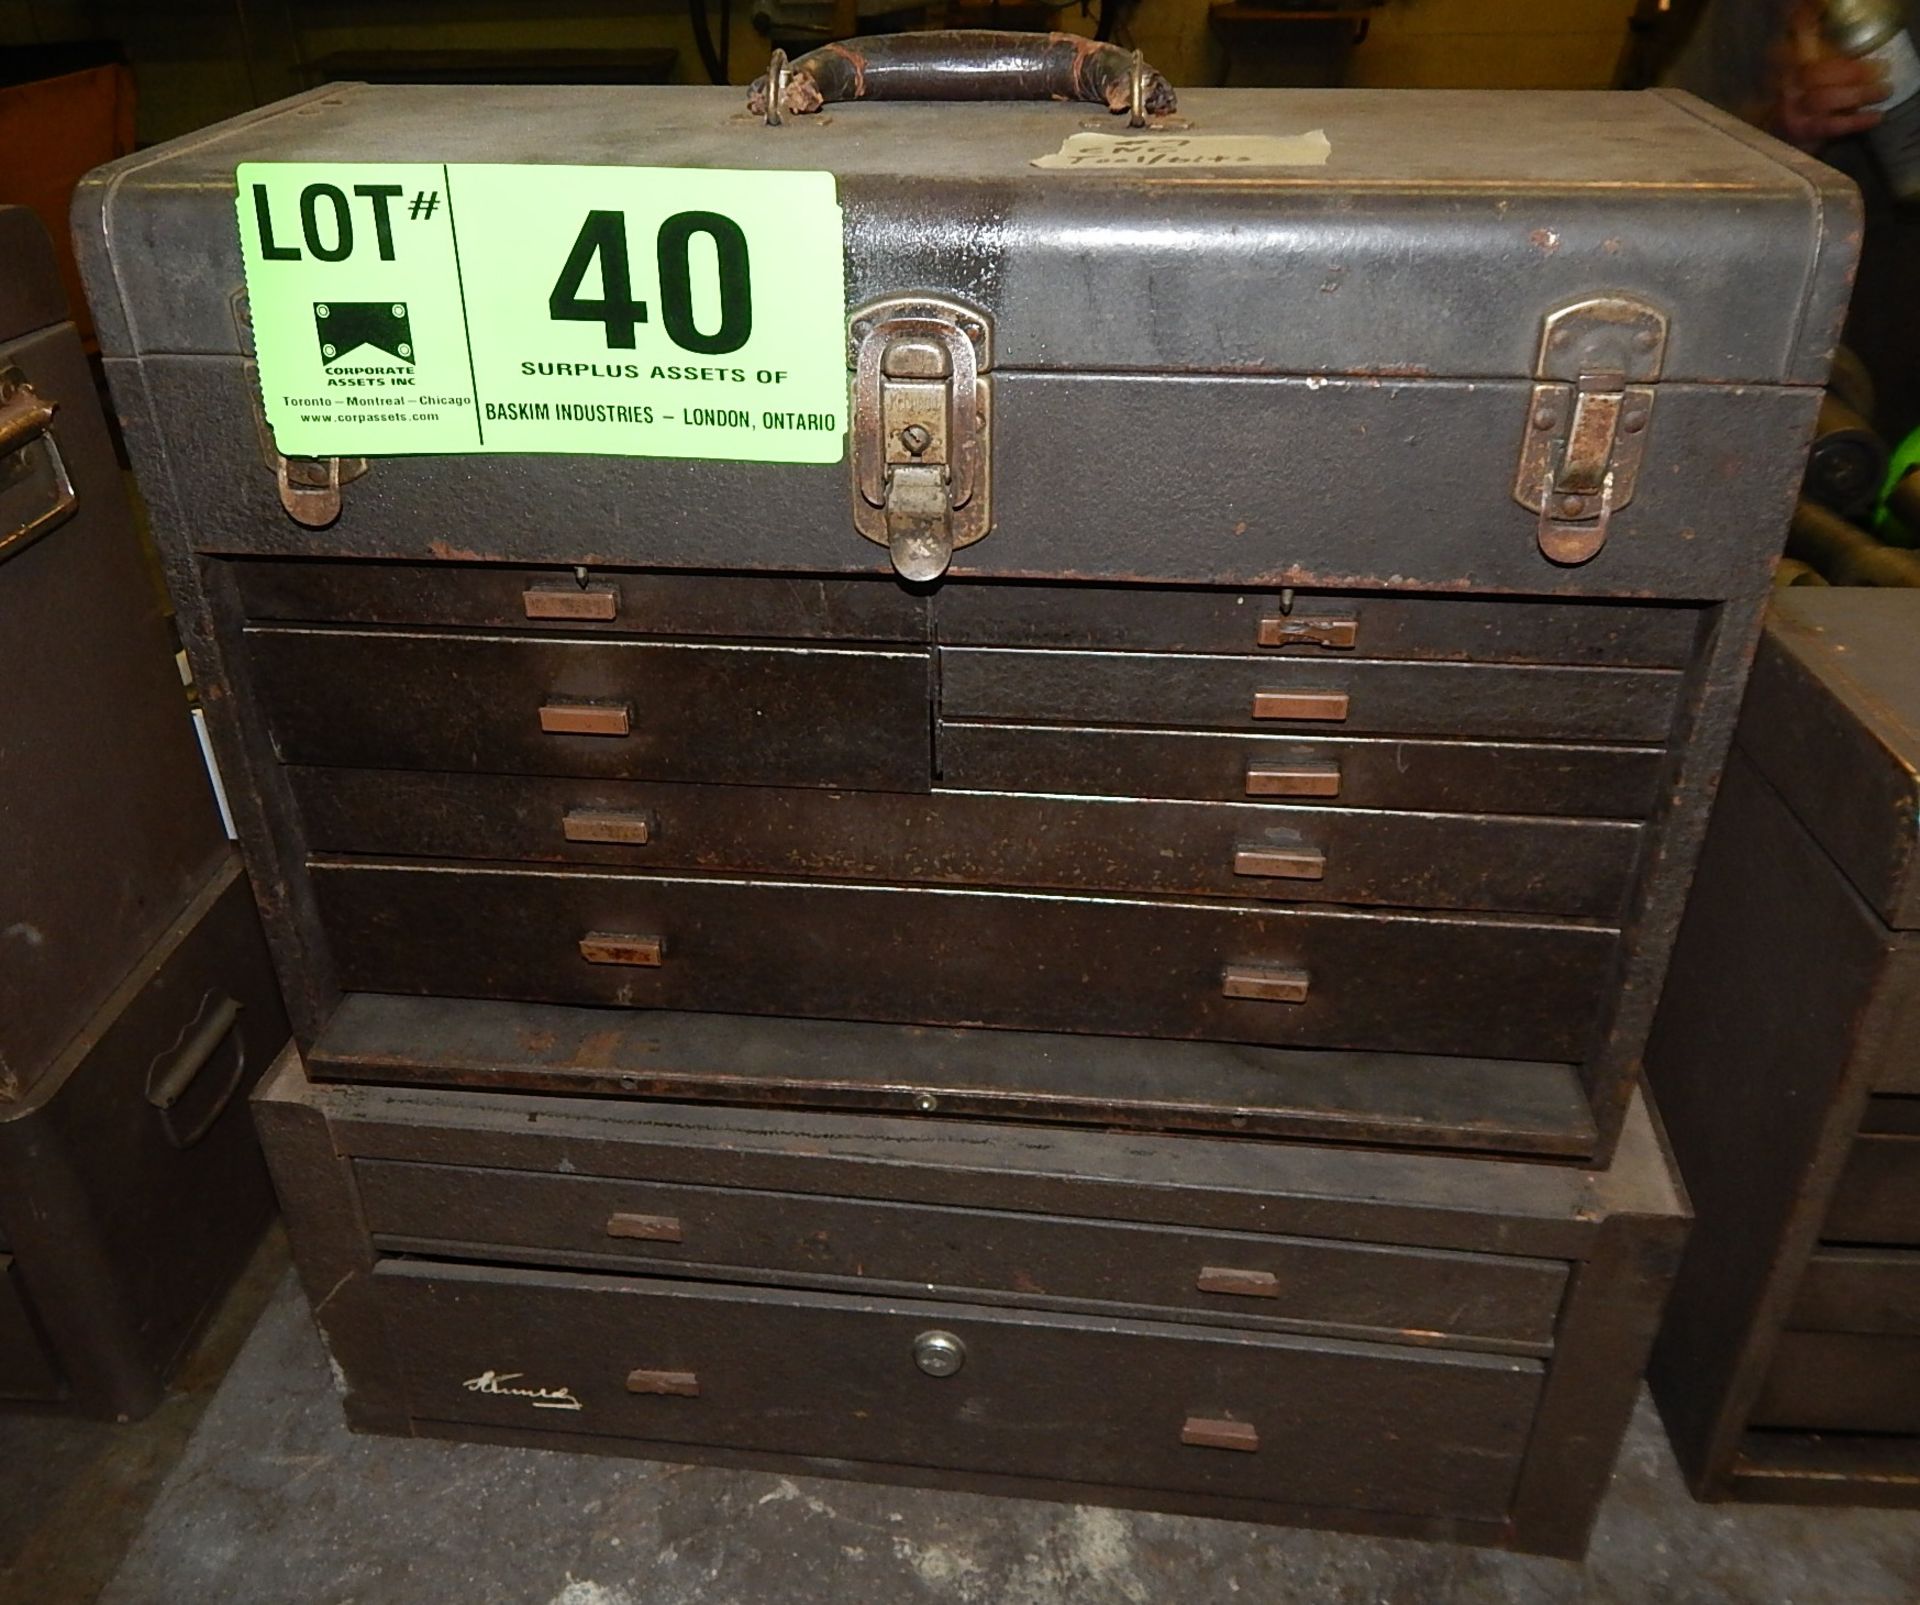 KENNEDY TOOL CHEST